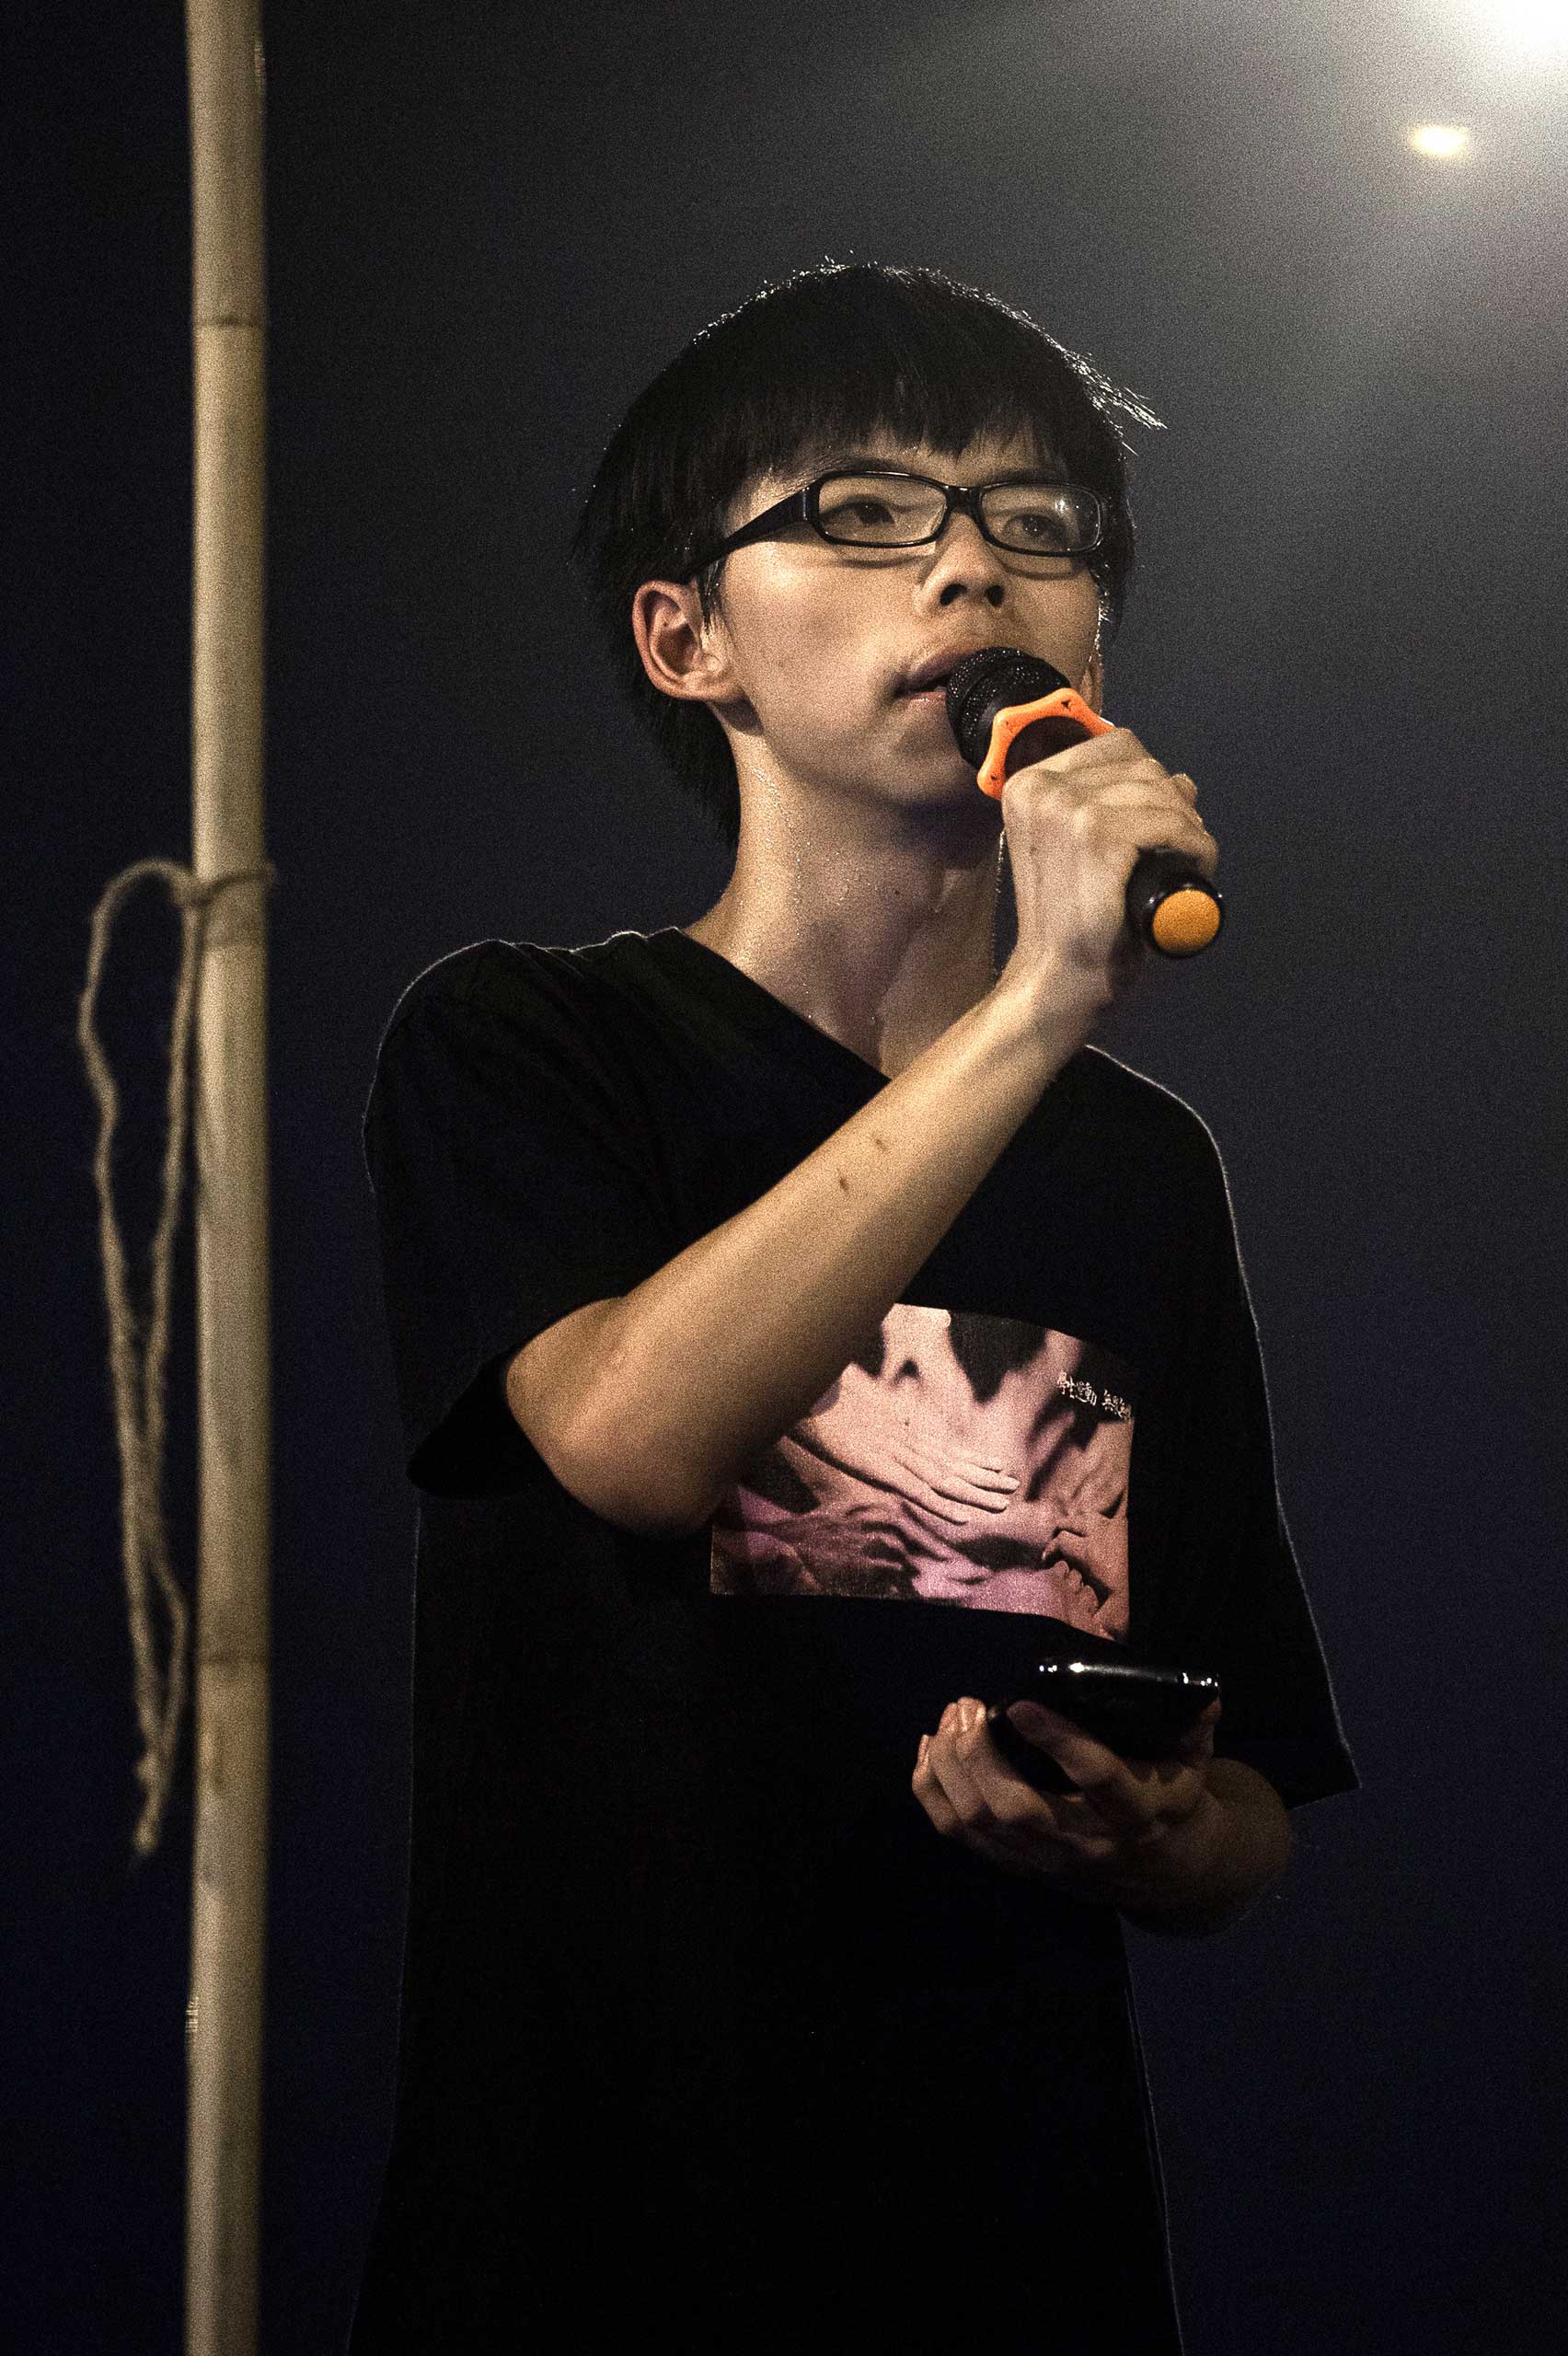 Joshua Wong, leader of the student pro-democracy group scholarism addresses demonstrators after the press conference of Hong Kong Chief Executive Leung Chun-ying in Hong Kong on October 2, 2014. Hong Kong's embattled leader rejected protesters' calls for him to resign, but in a significant concession agreed to talks with a students group involved in mass pro-democracy demonstrations that have paralysed parts of the city.AFP PHOTO / Philippe Lopez (Photo credit should read PHILIPPE LOPEZ/AFP/Getty Images)